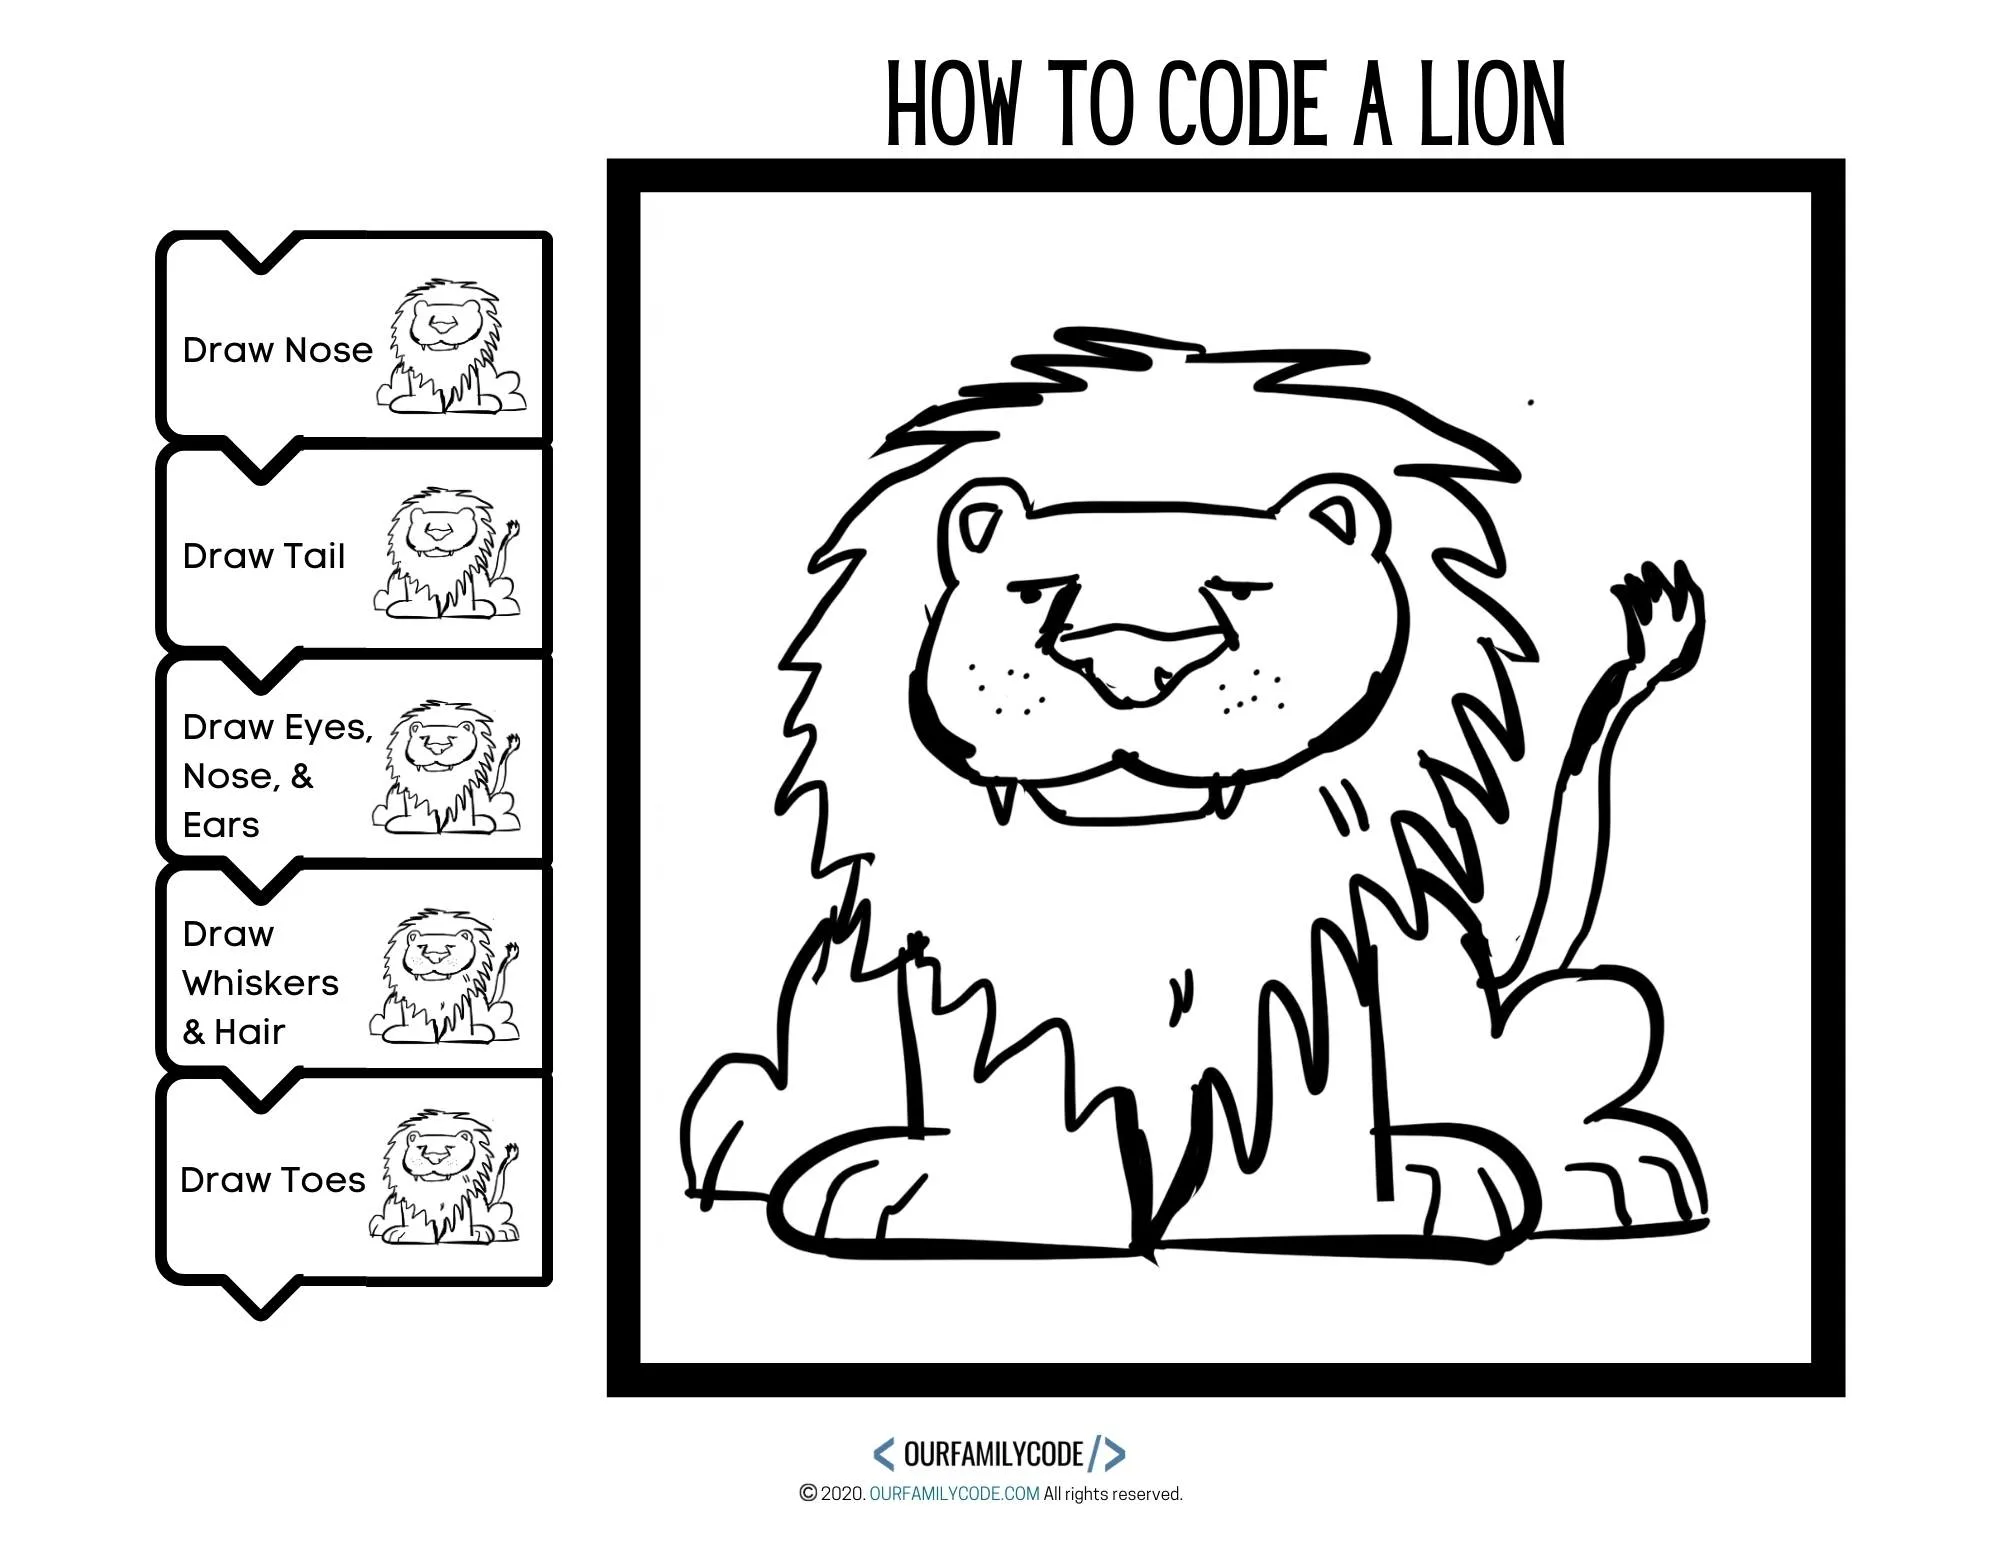 draw toes directed drawing algorithm art lion coding activity